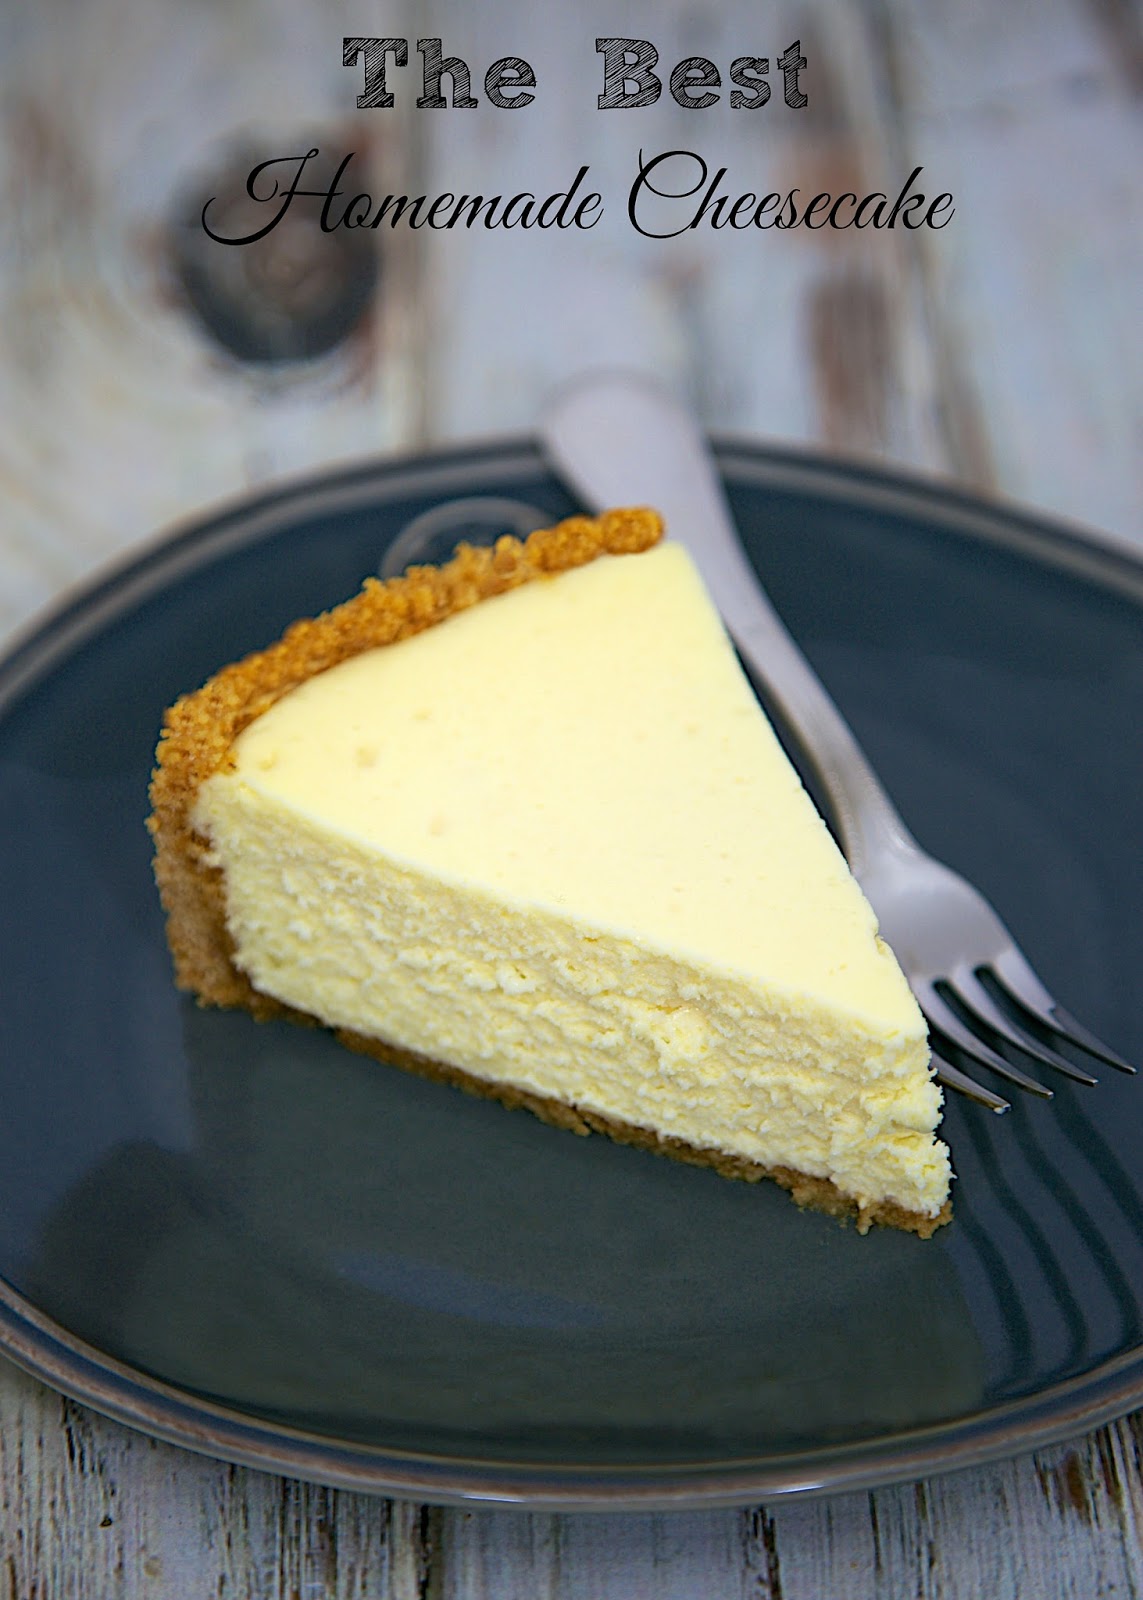 The Best Home made Cheesecake